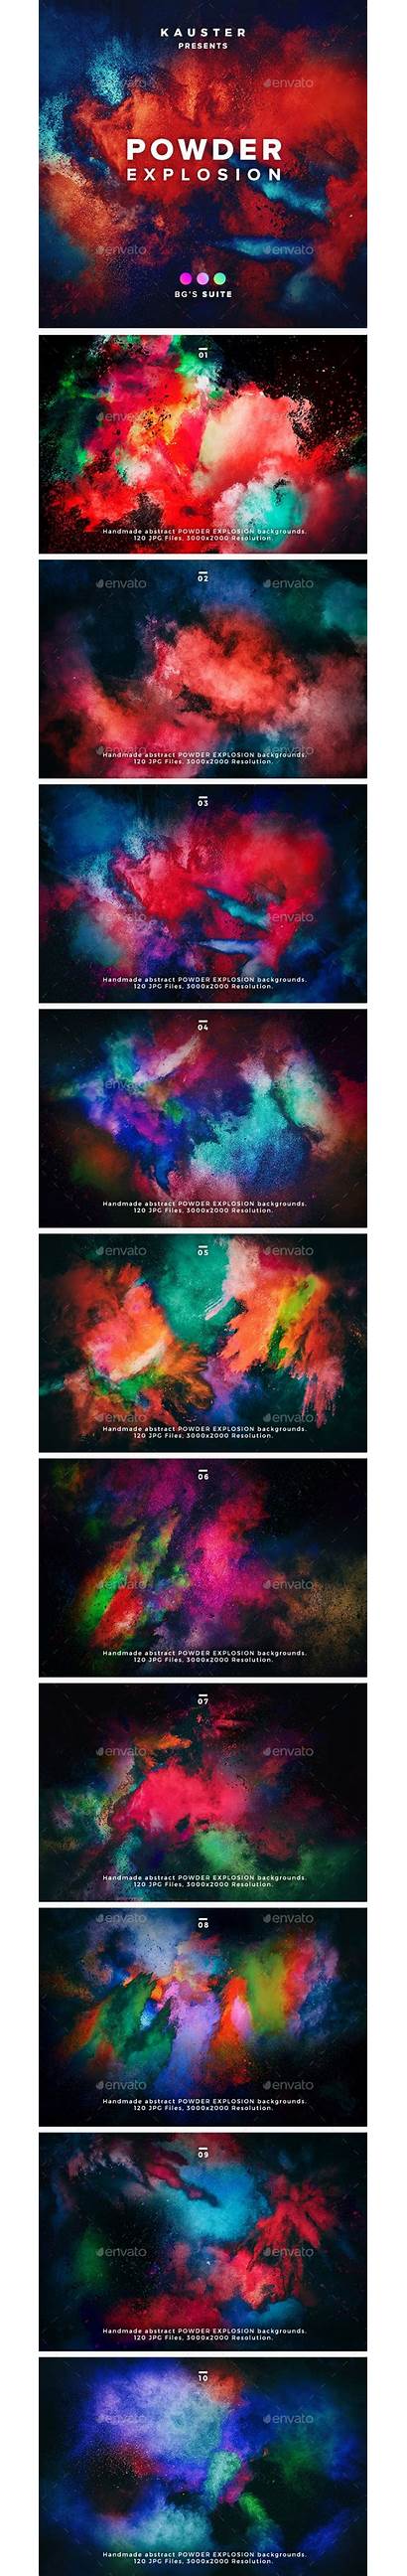 Powder Explosion Wallpapers Graphicriver Background Backgrounds Themes